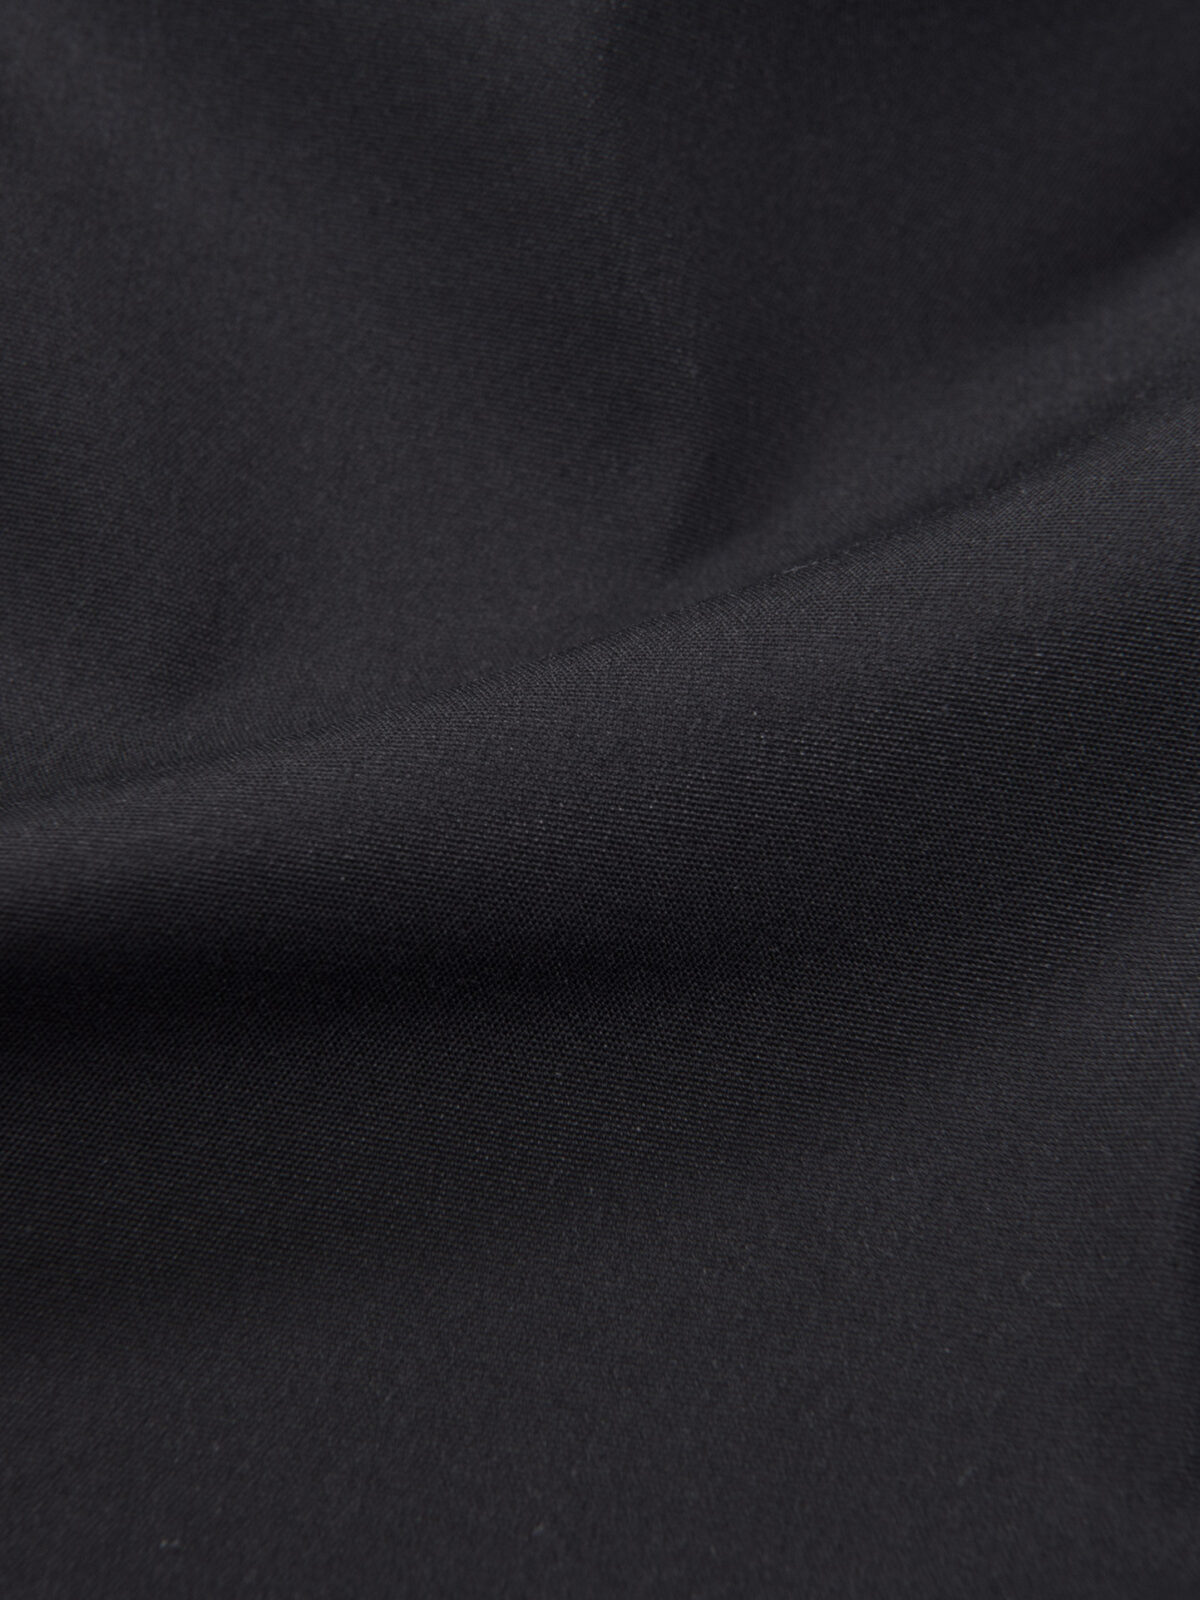 Black stretch pebble crepe fabric 2 way stretch textured polyester